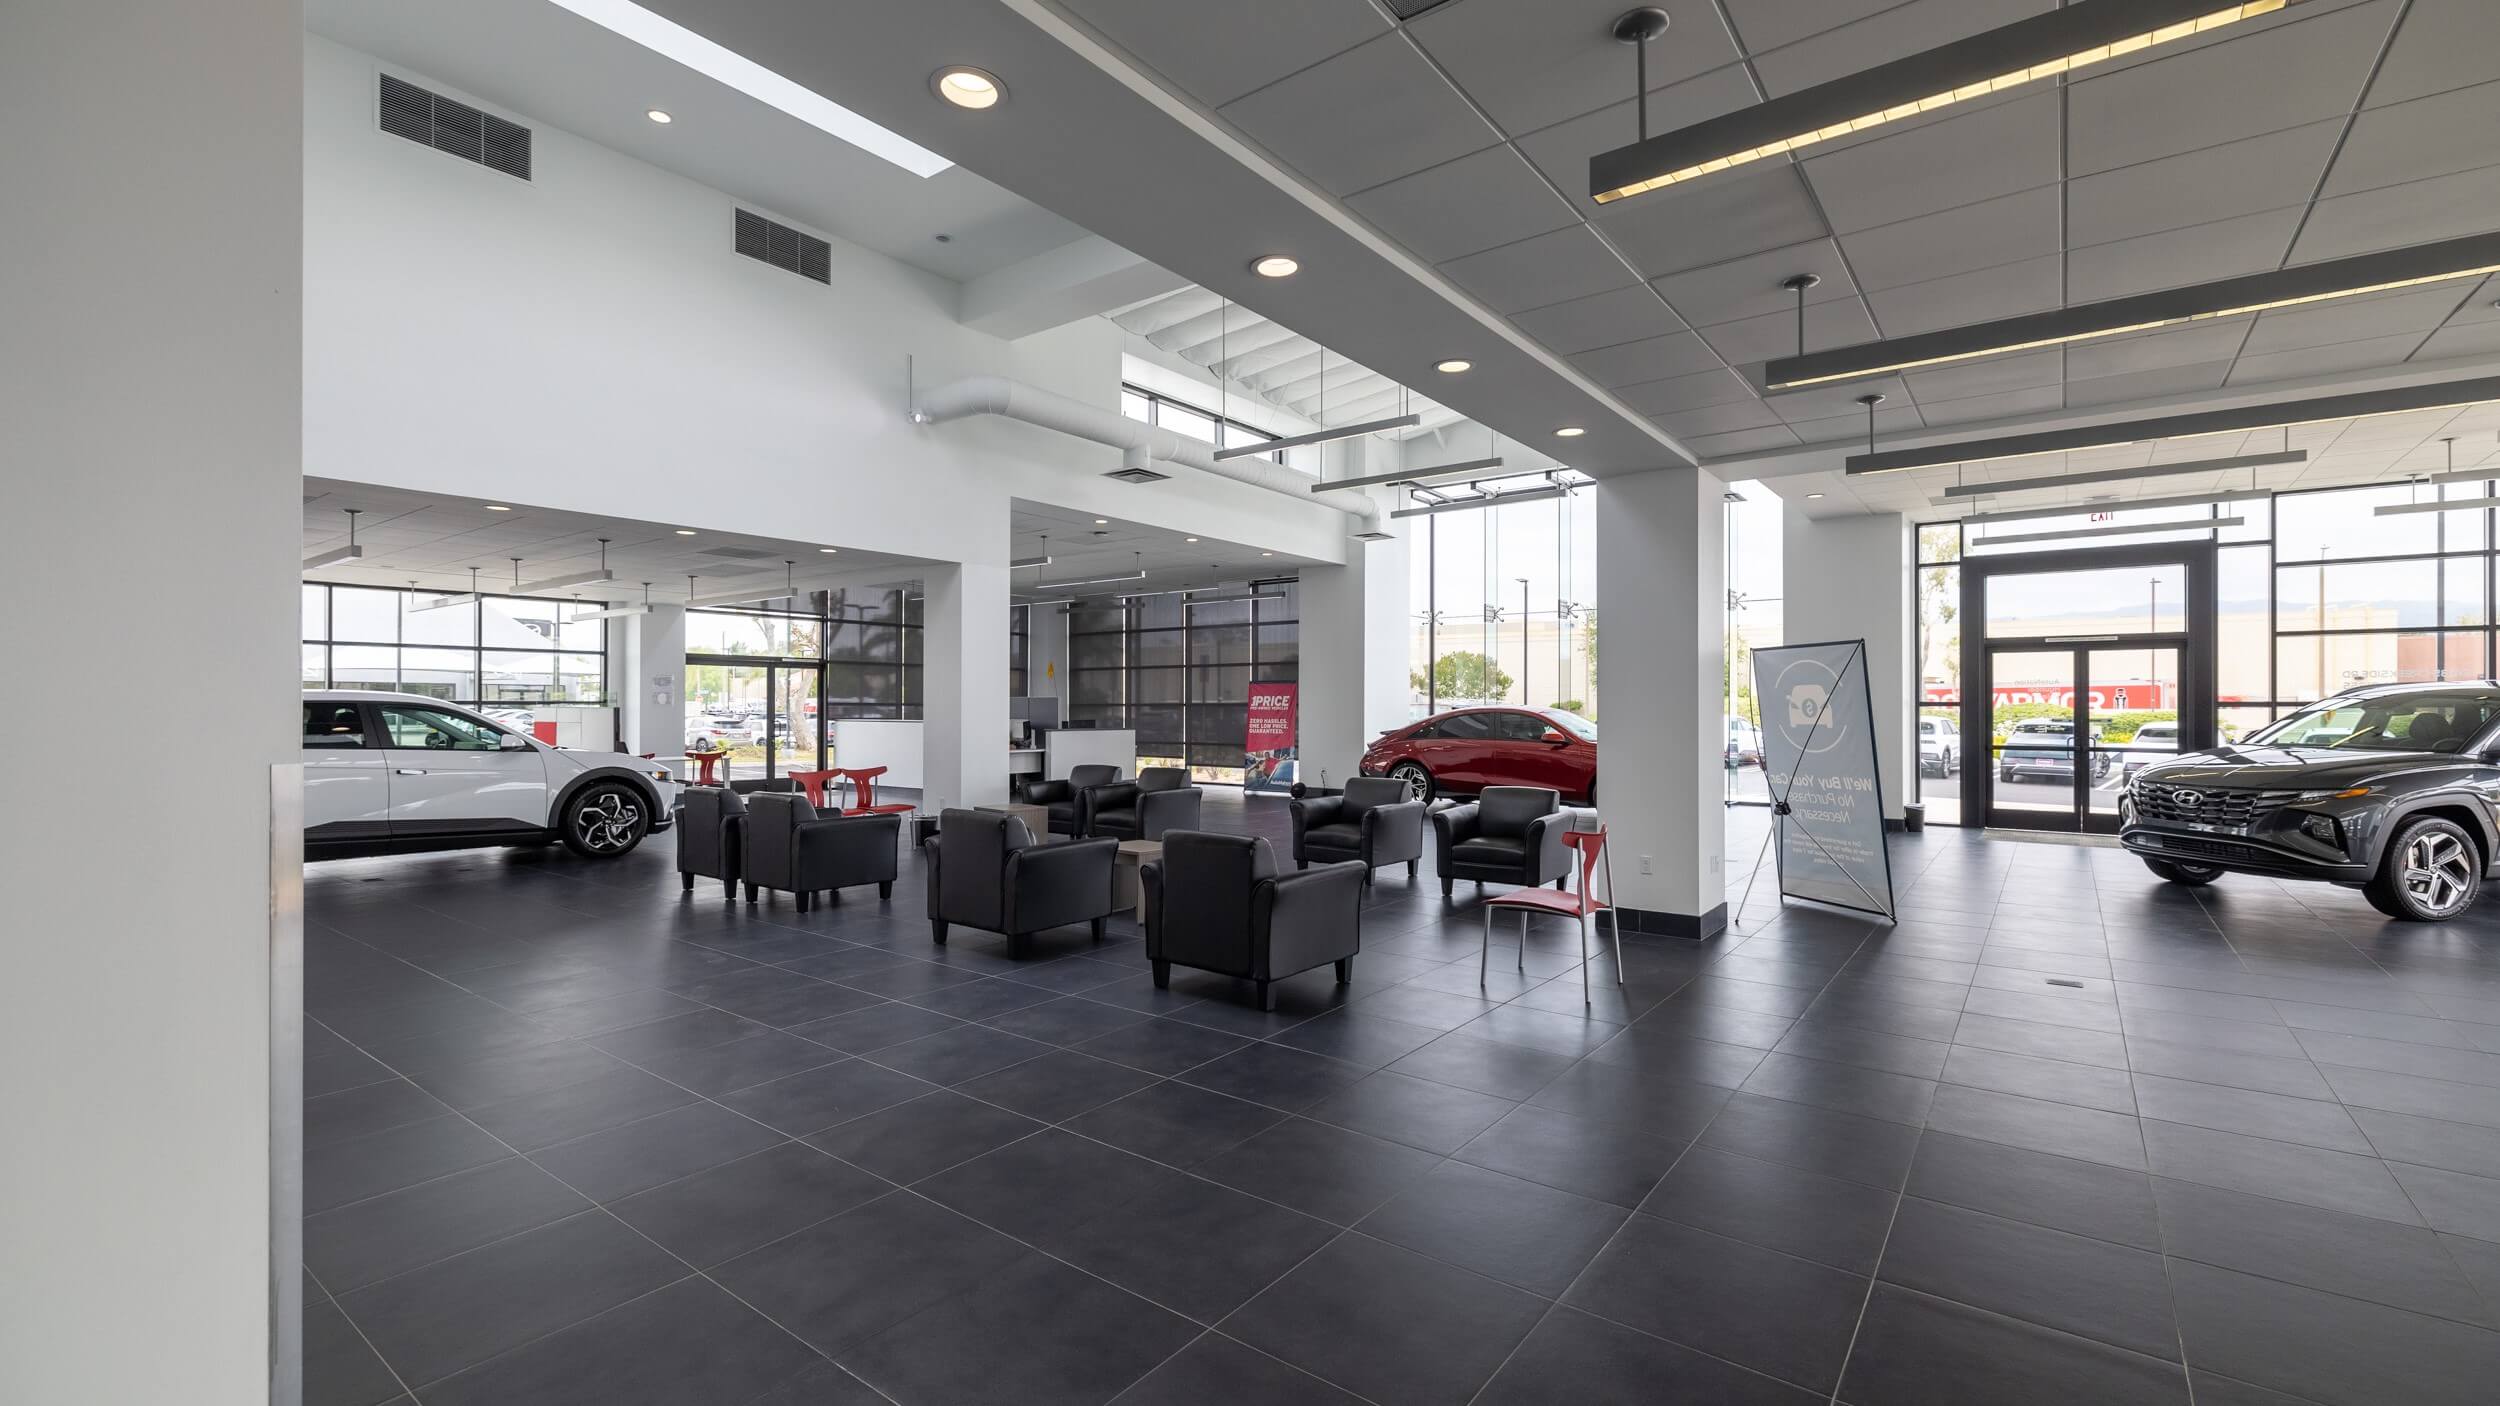 Interior shot of Hyundai of Valencia car dealership, with waiting area and cars on display